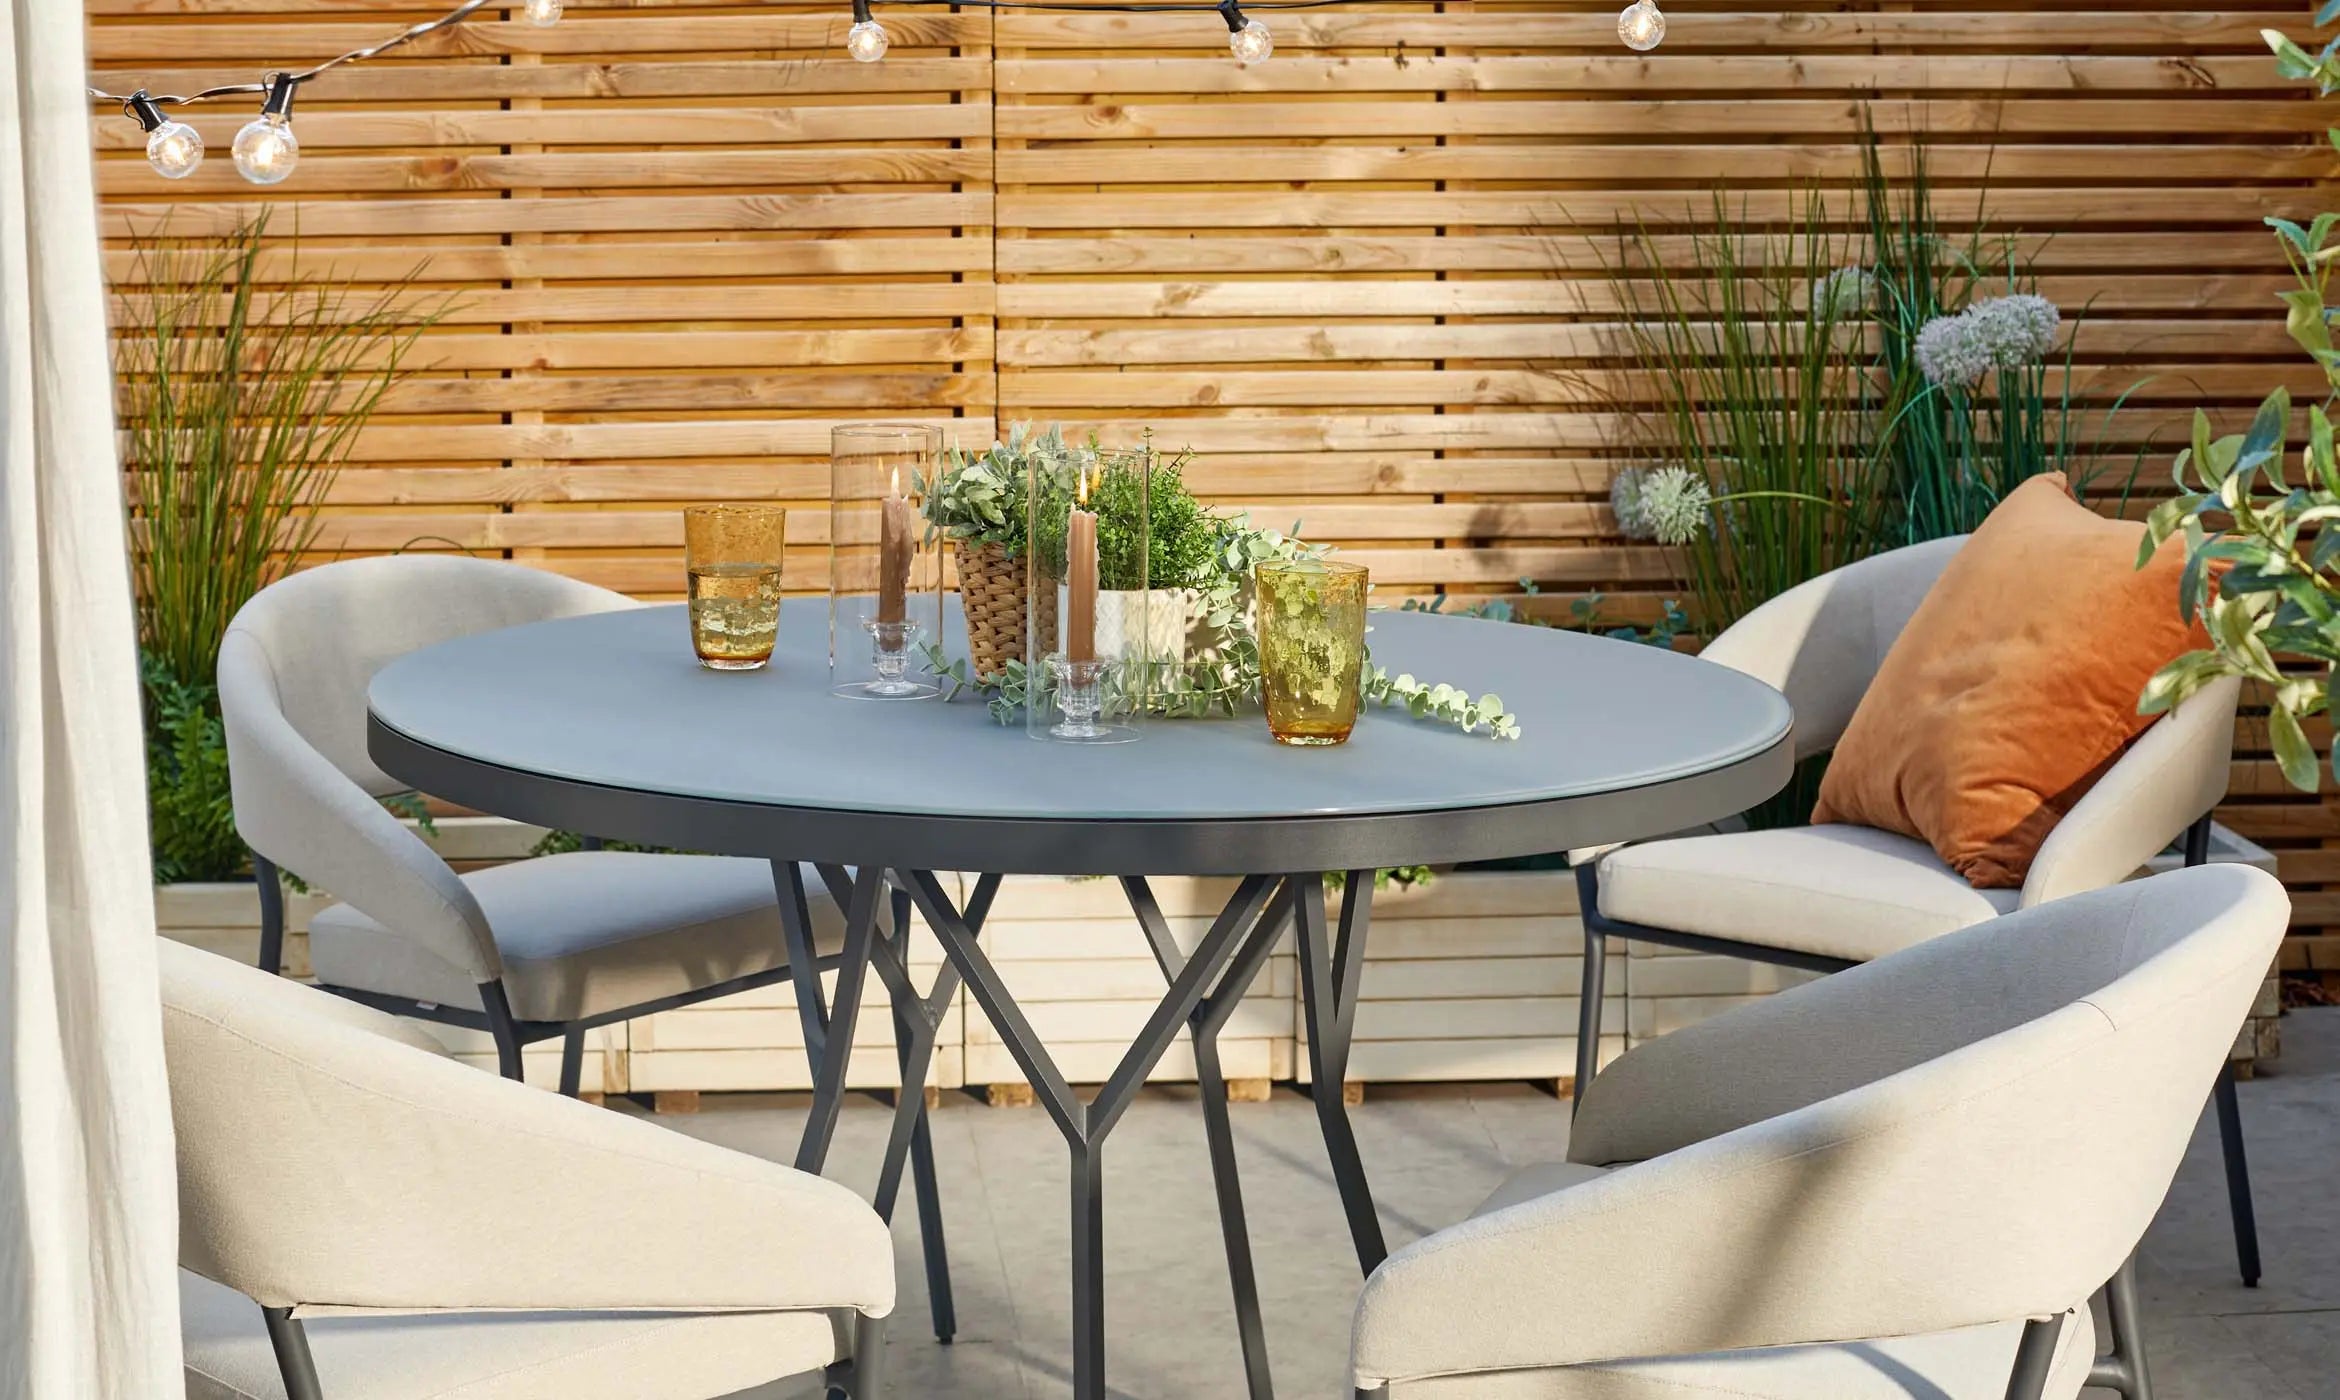 5 Reasons Why You Should Choose Danetti Furniture for Your Garden